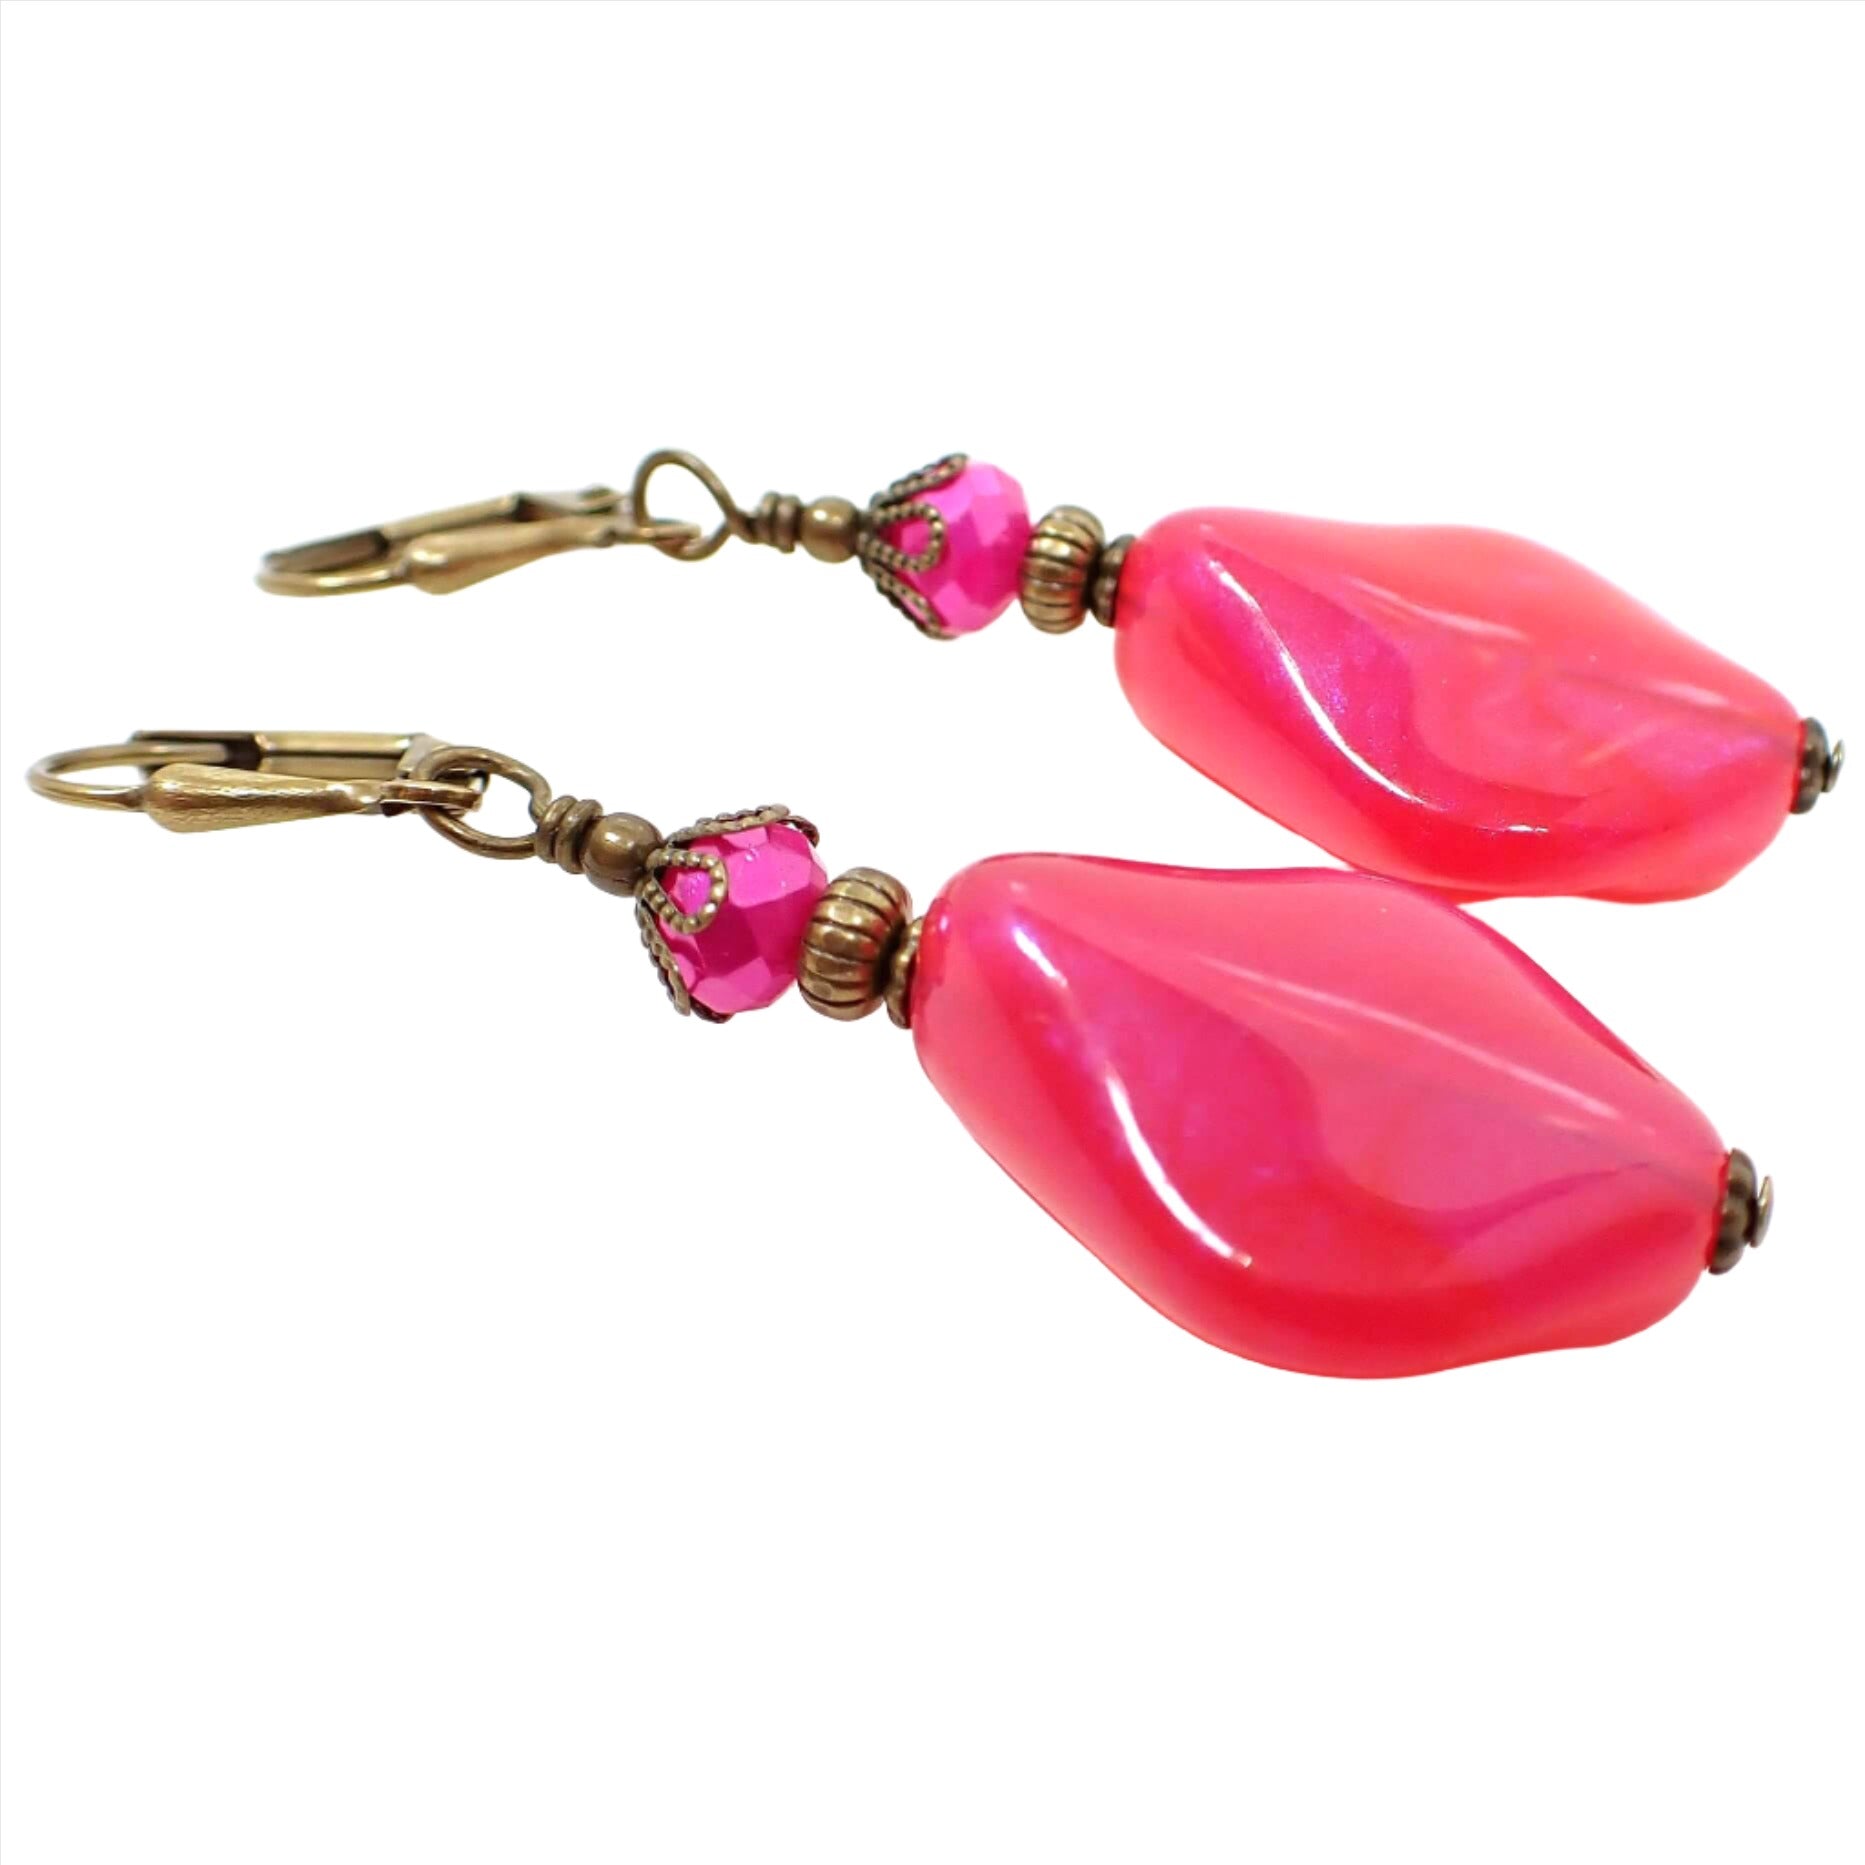 Angled side view of the handmade color shift earrings. The metal is antiqued brass in color. There are hot pink faceted glass crystals at the top. The bottom beads are shaped like curved and angled teardrops are are bright pink lucite with shimmers of purple color as you move around in the light.